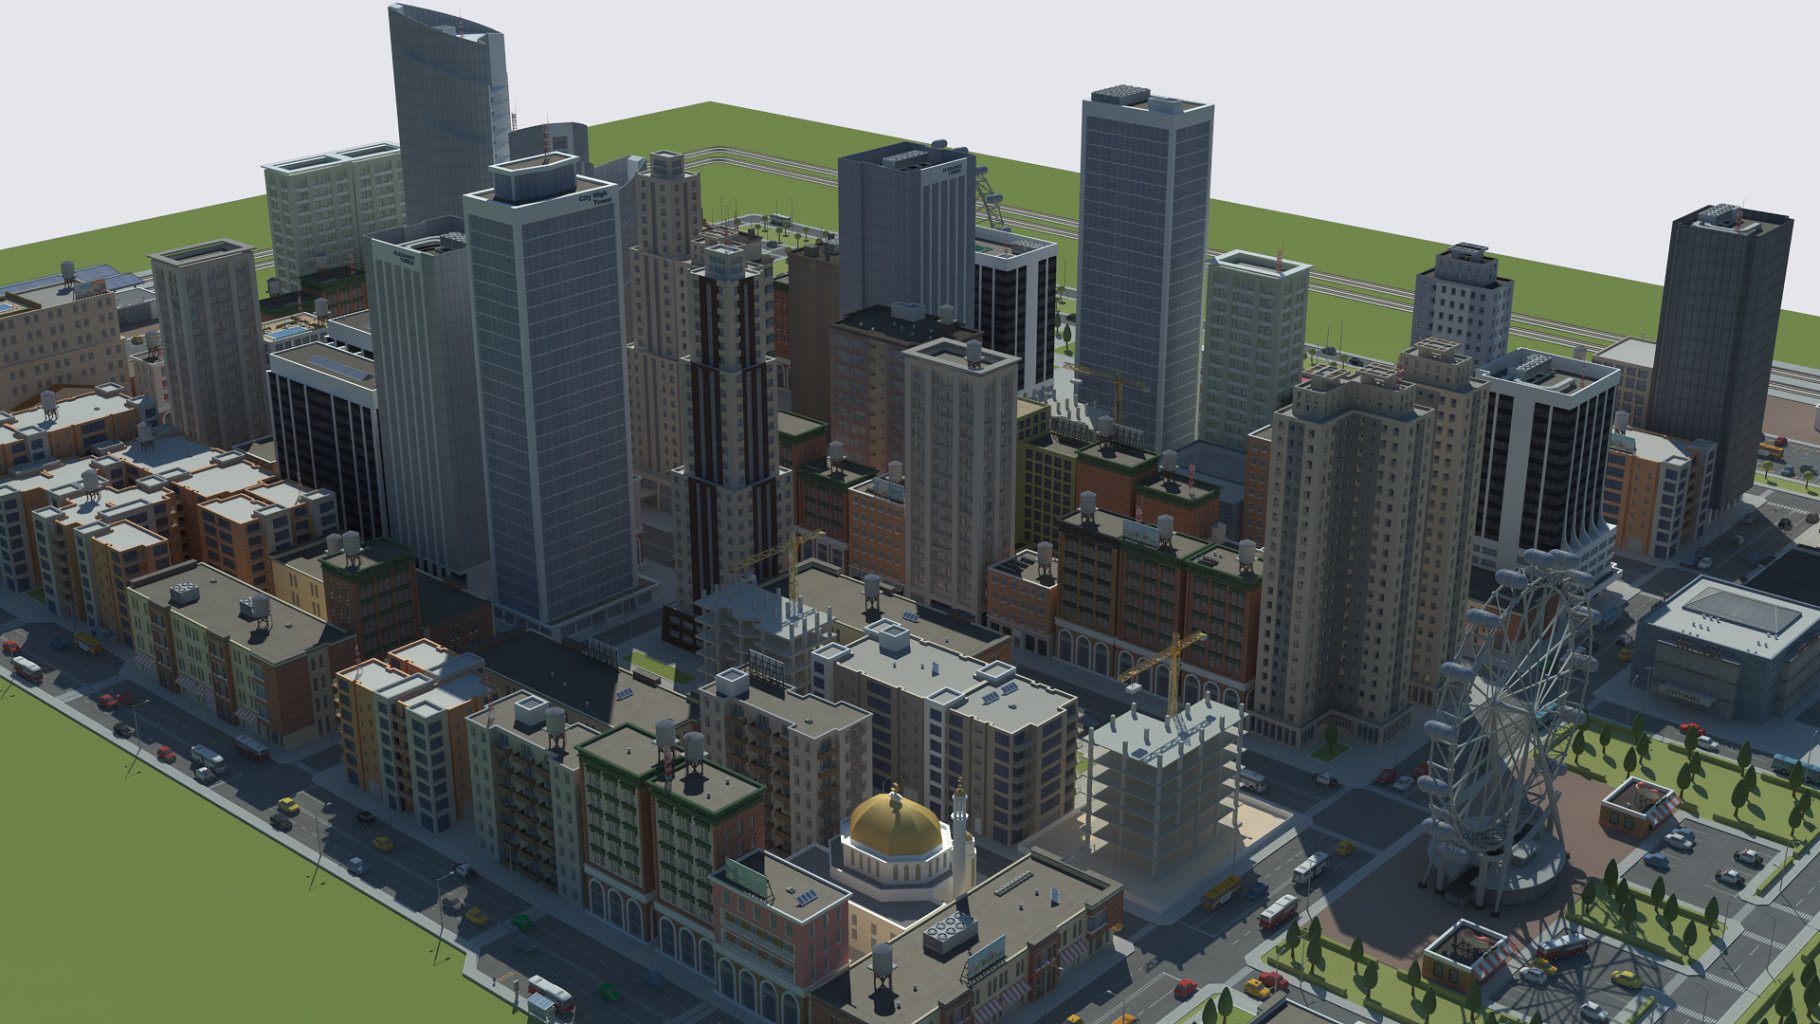 Rendering a gorgeous lowpoly city 3d model